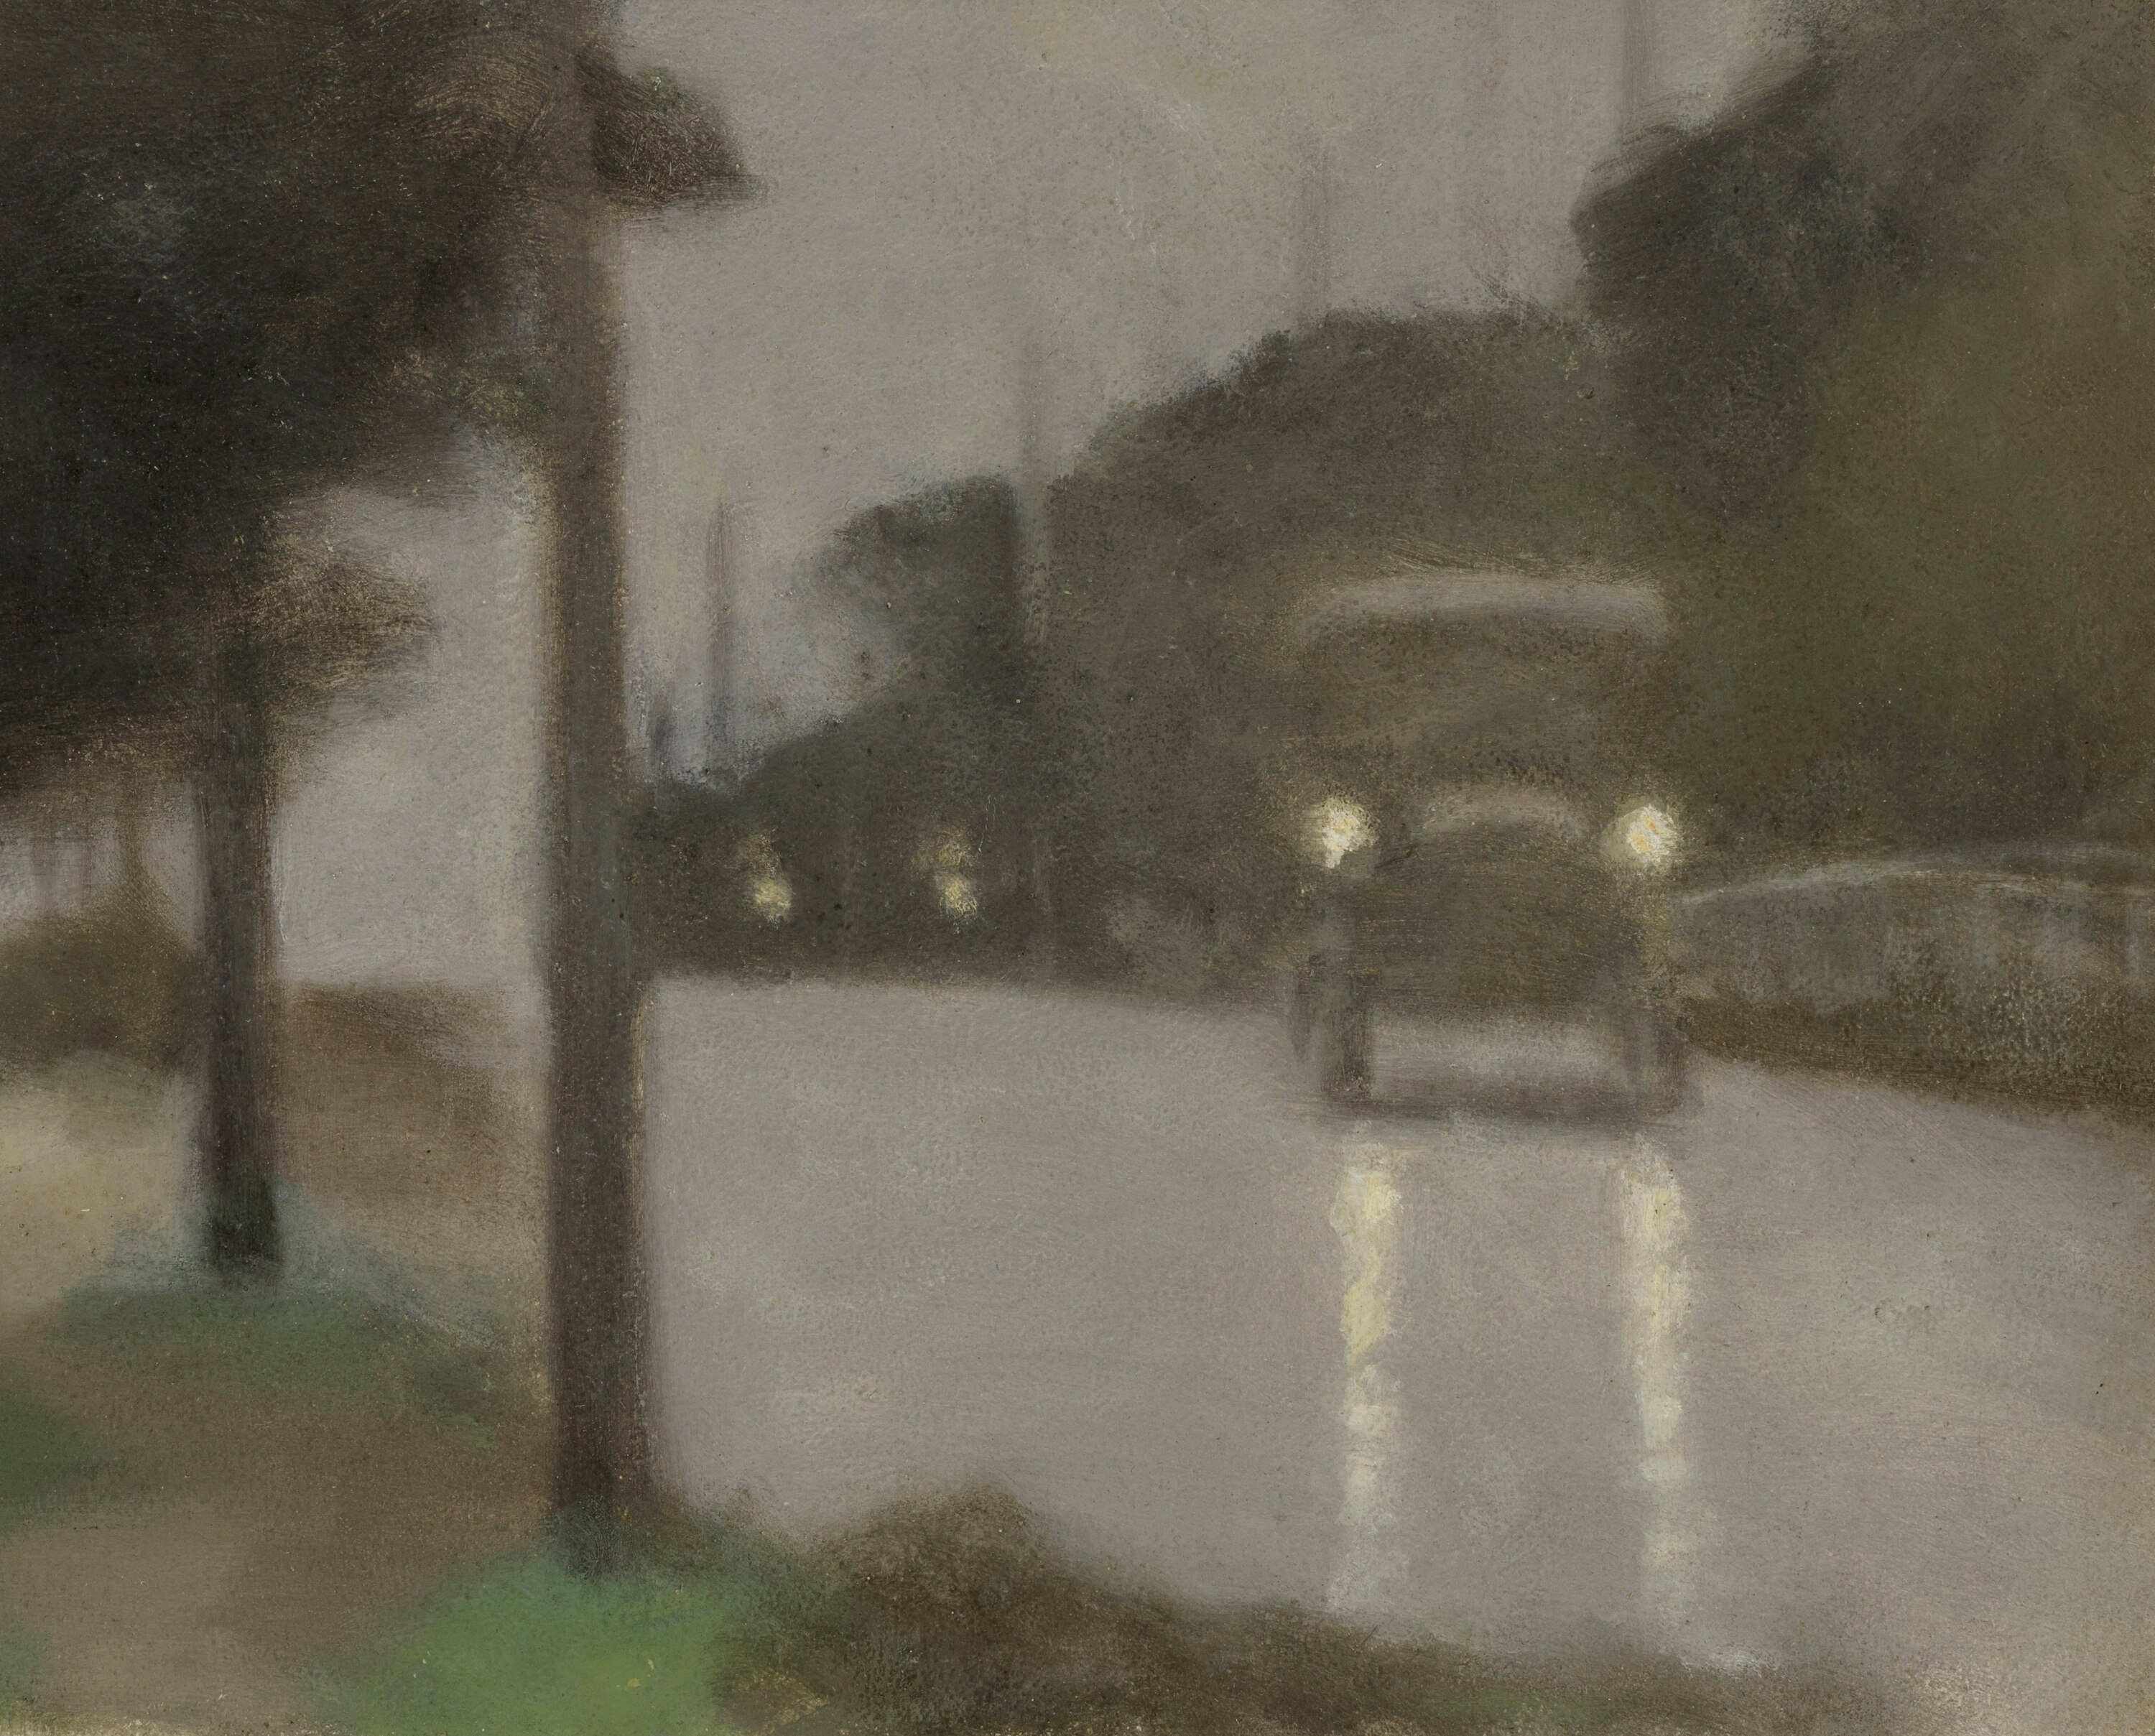 A painting by Clarice Beckett, blurry realism, of a 1920s car driving on a misty street